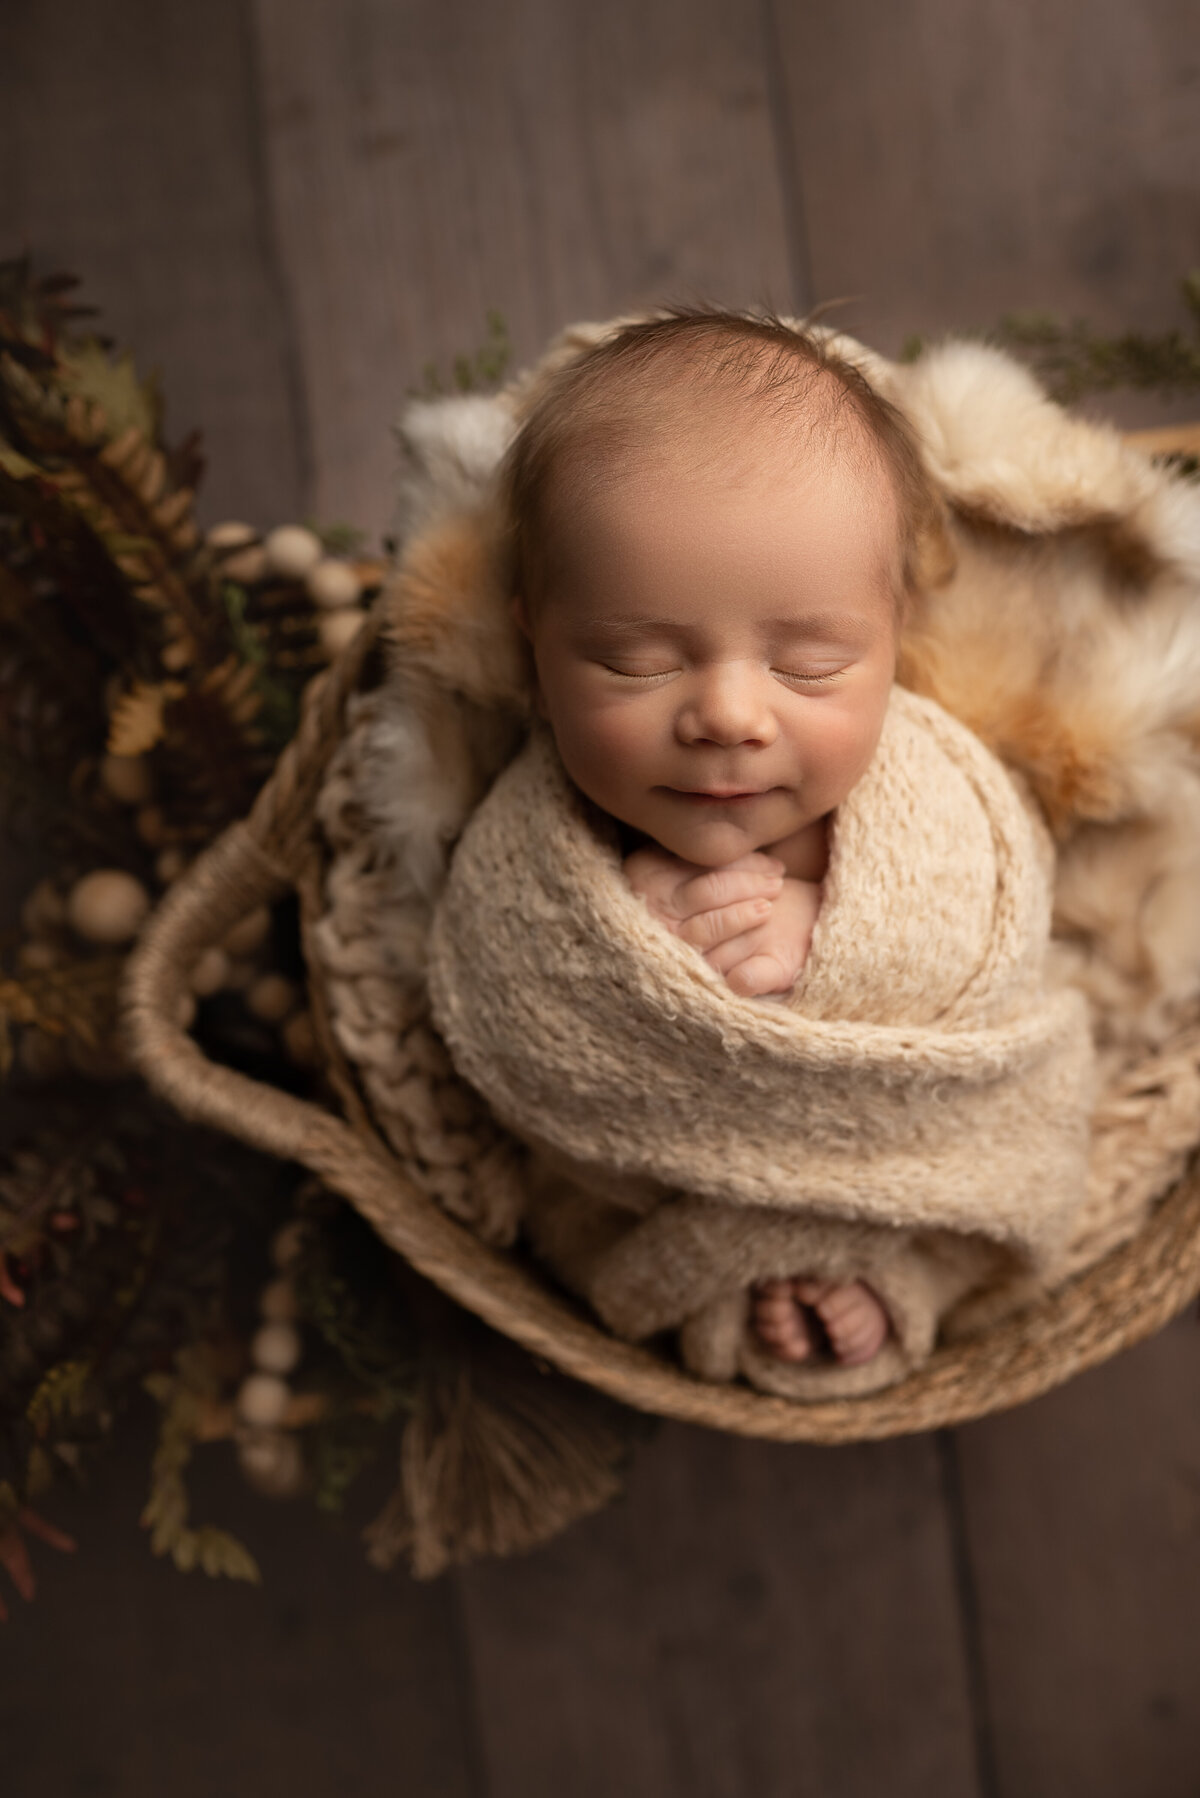 Katie Marshall, Philadelphia's best newborn baby photographer captures a newborn baby boy for a fine art photoshoot. Baby boy is swaddled in an oat-coloured knit with his fingers and toes peeking out. Baby is sleeping with a closed-mouth smile and laying atop of faux furs in a basket.